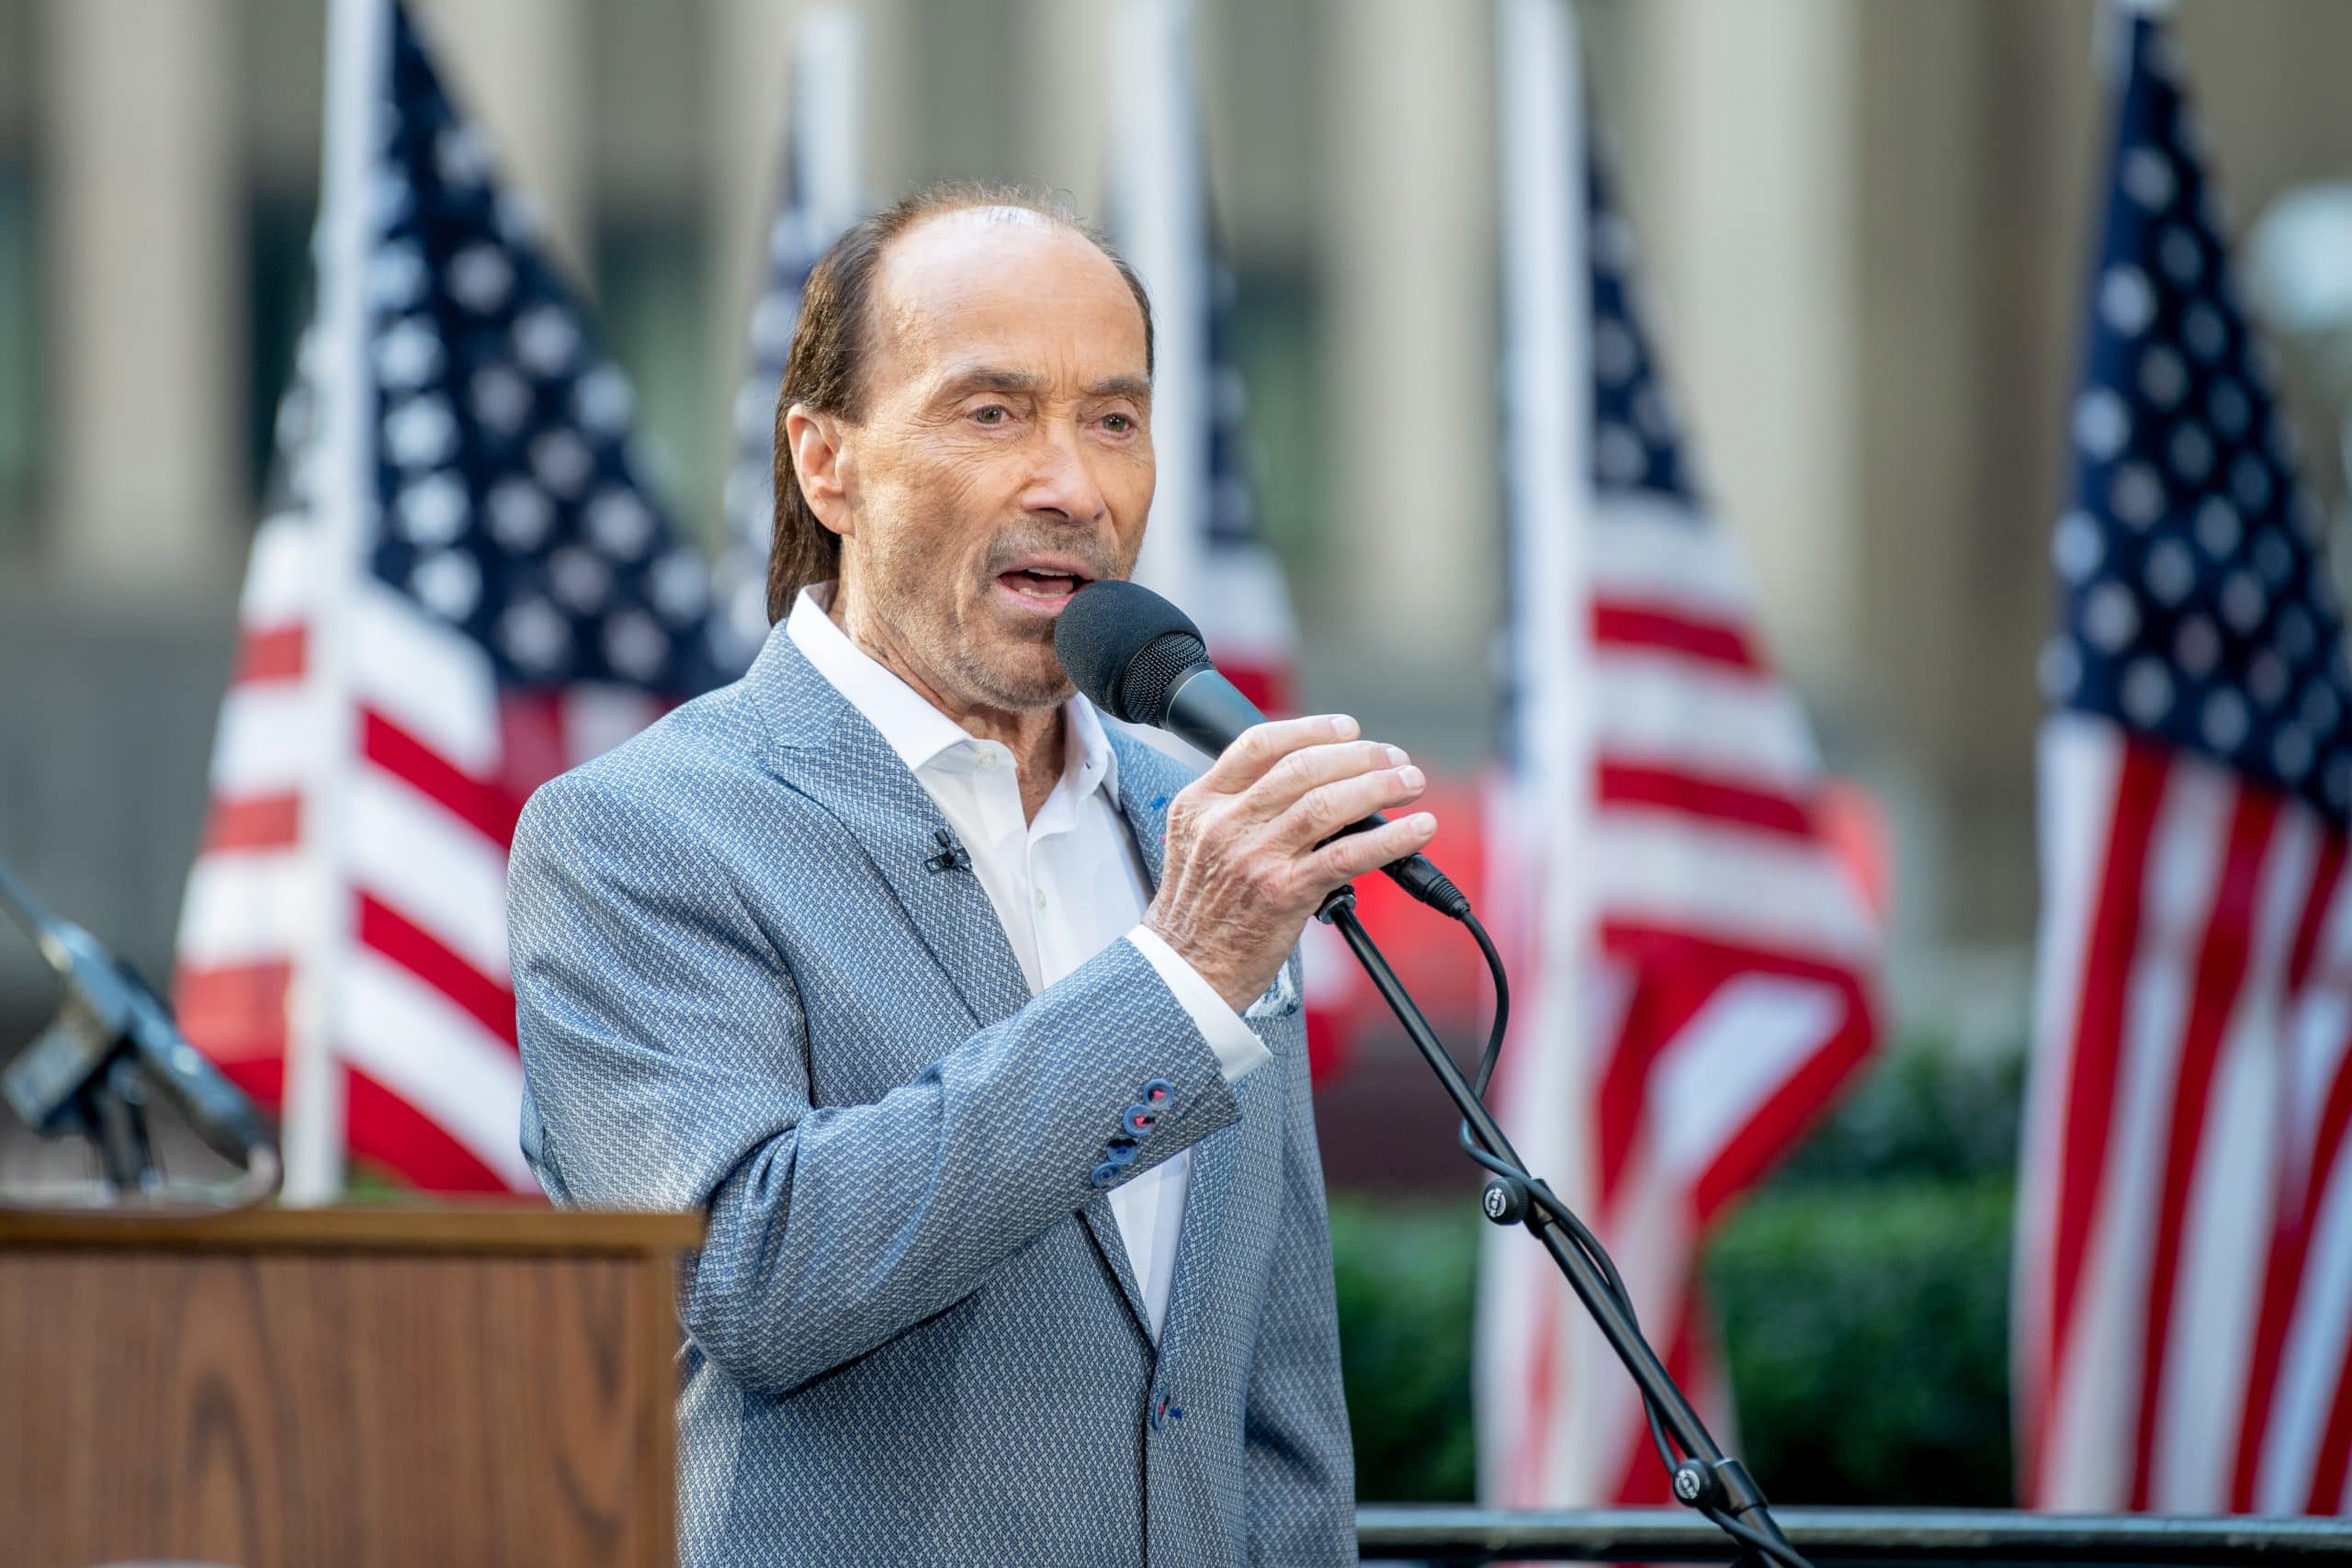 Lee Greenwood received the Helping a Hero Defense of Freedom Award